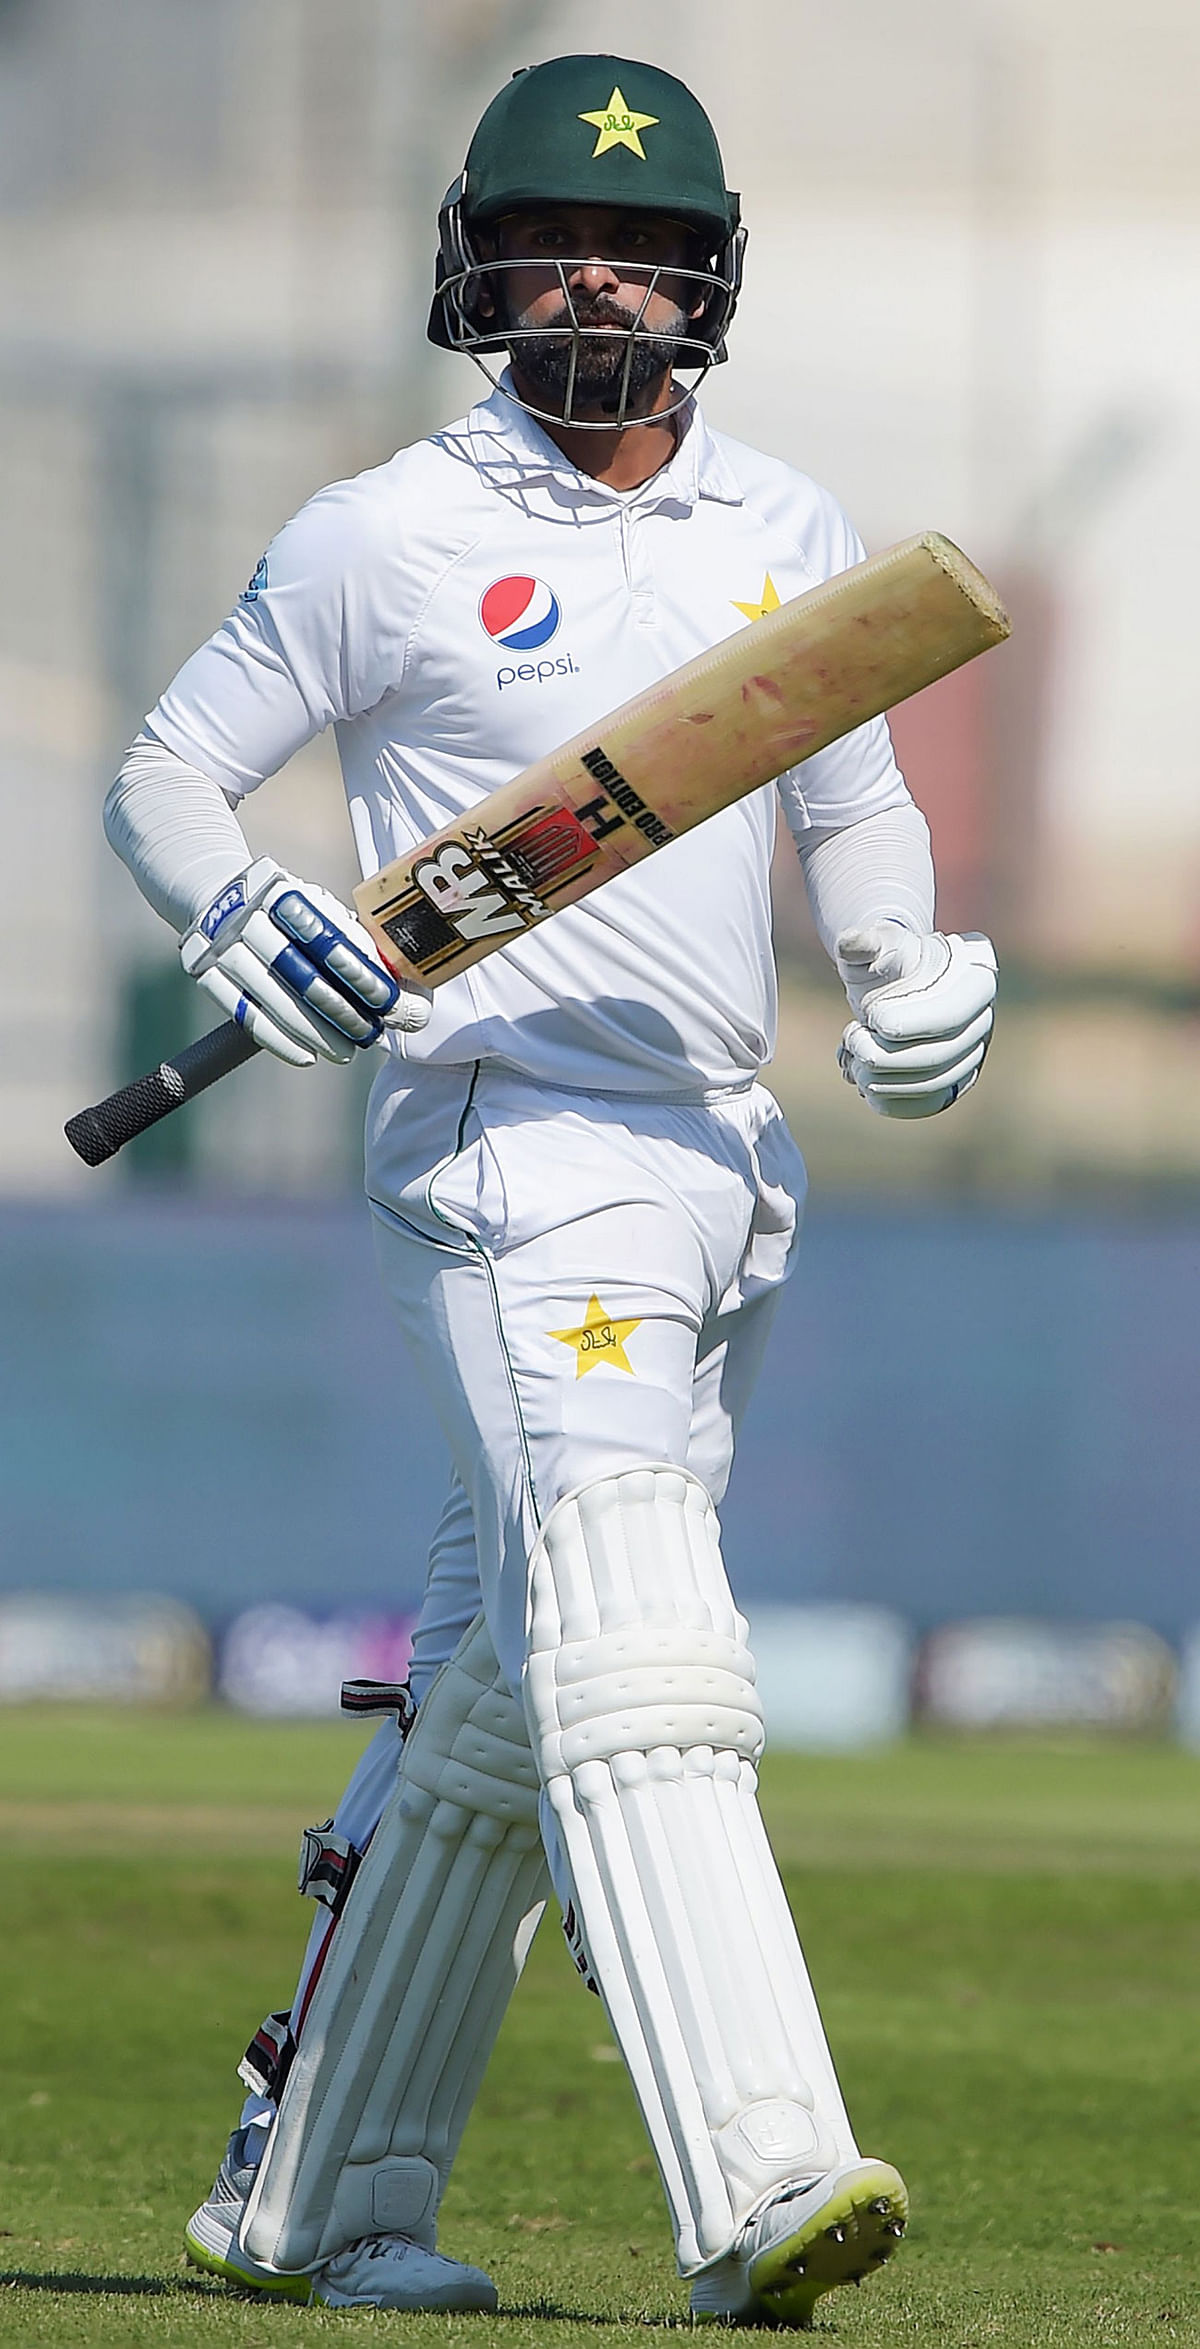 Hafeez has managed just 66 runs in seven innings since scoring a hundred against Australia in Dubai last month following his recall to five-day cricket. AFP